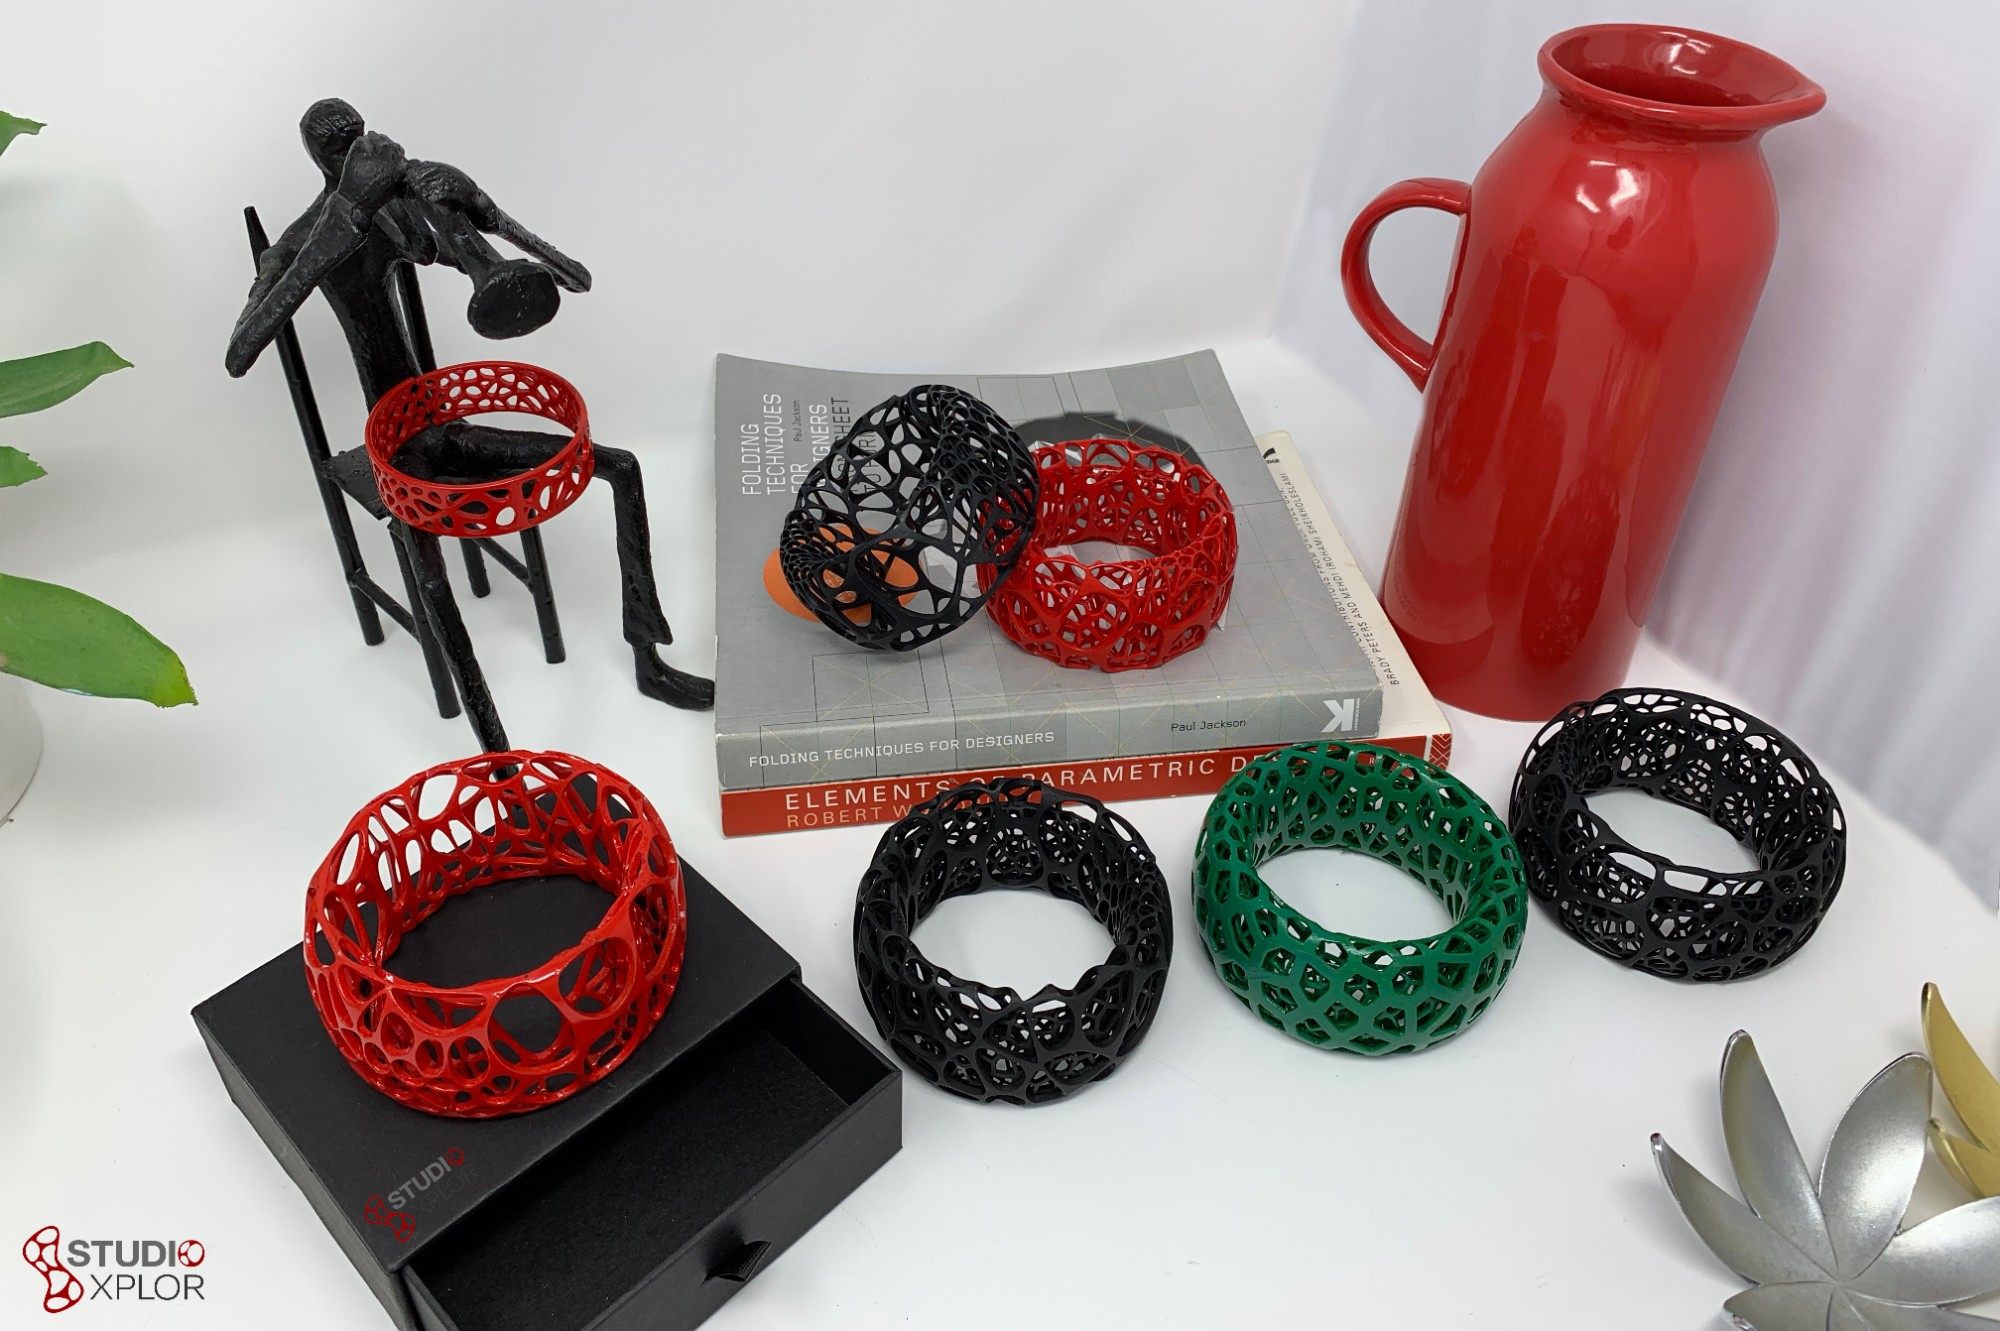 3D printed jewelry company StudioXplor secured a purchase order and won the Innovation and Partnerships award.